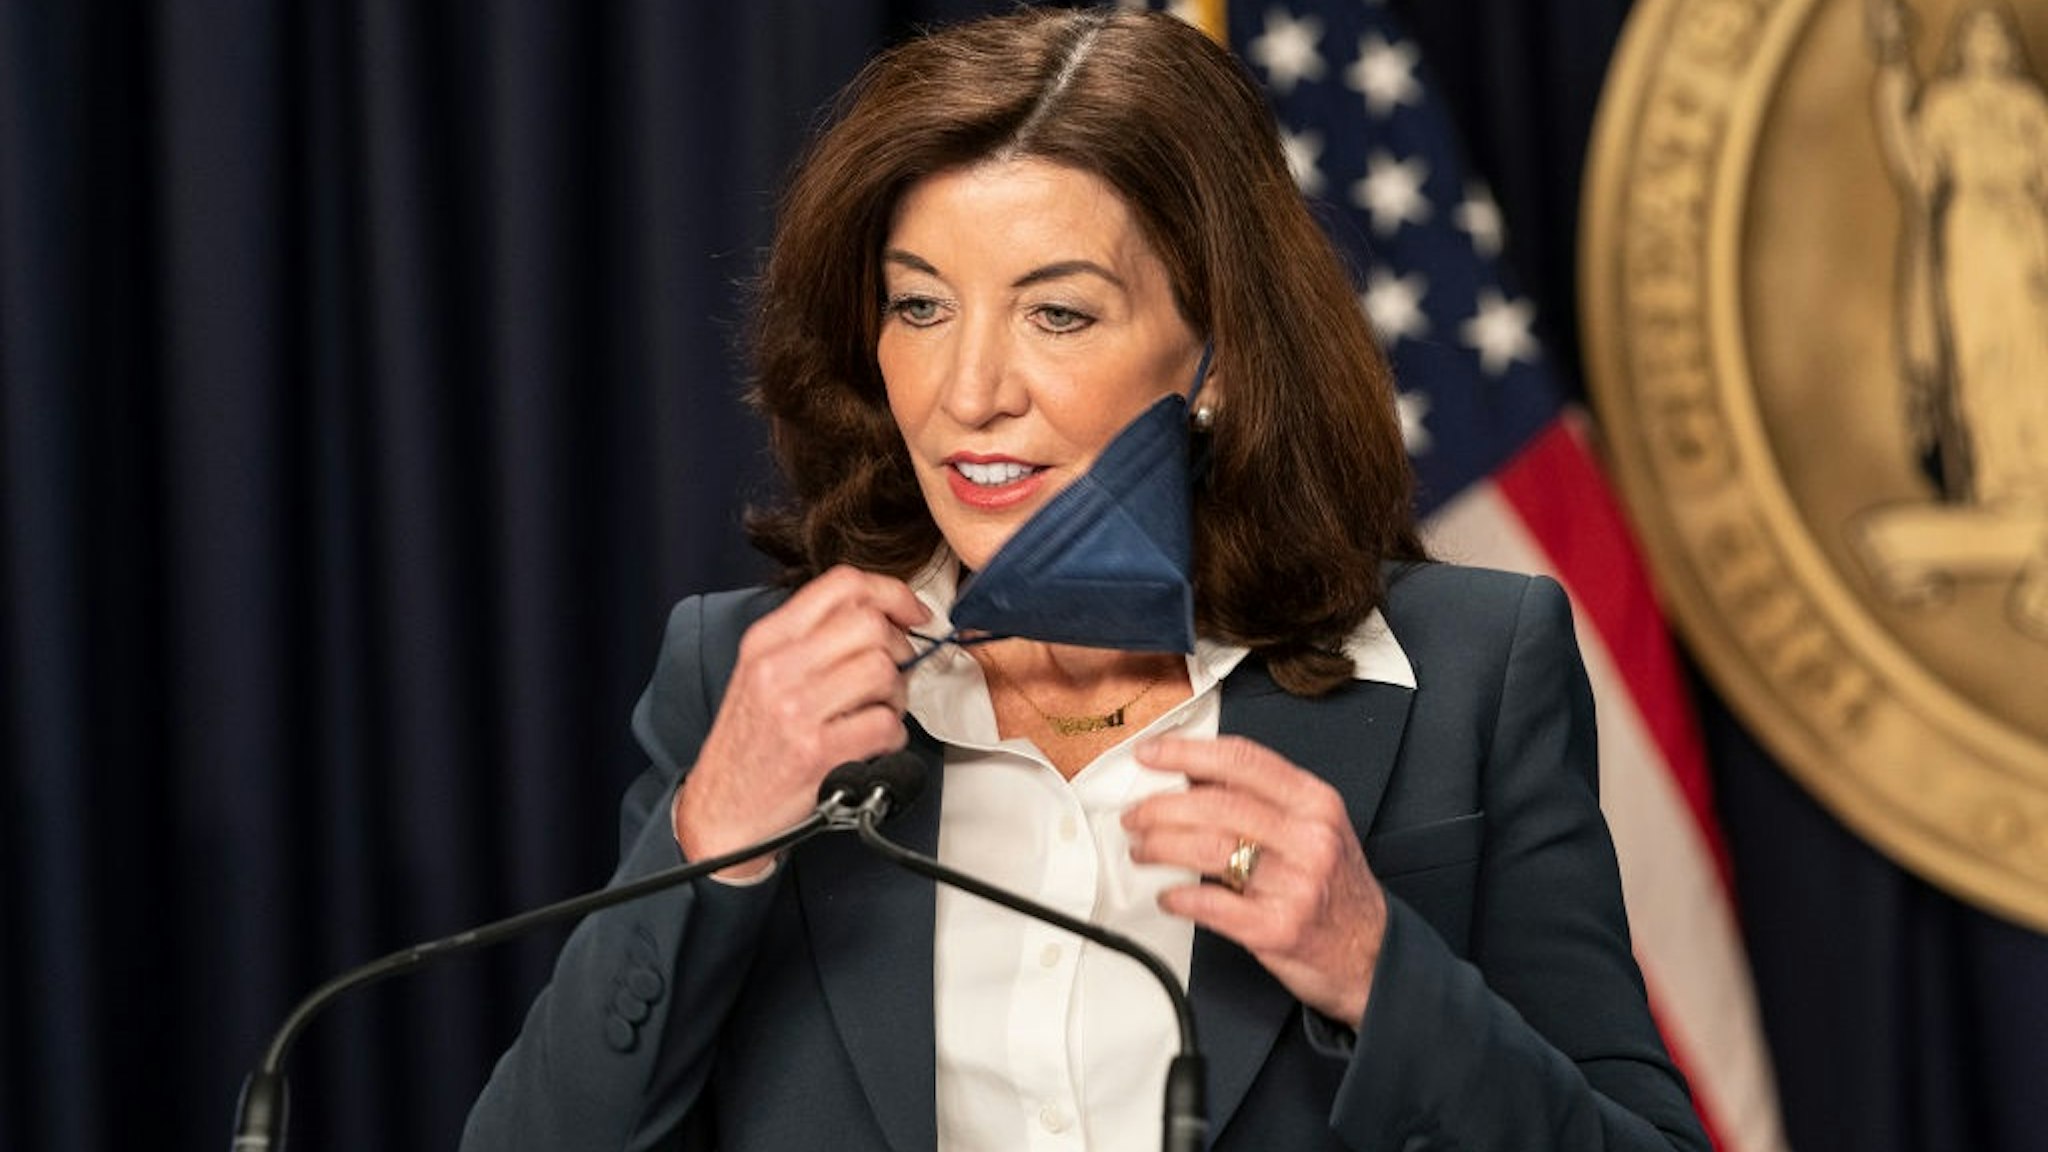 New York Gov. Kathy Hochul signed into law a gun measure requiring concealed carry applicants to hand over their social media accounts